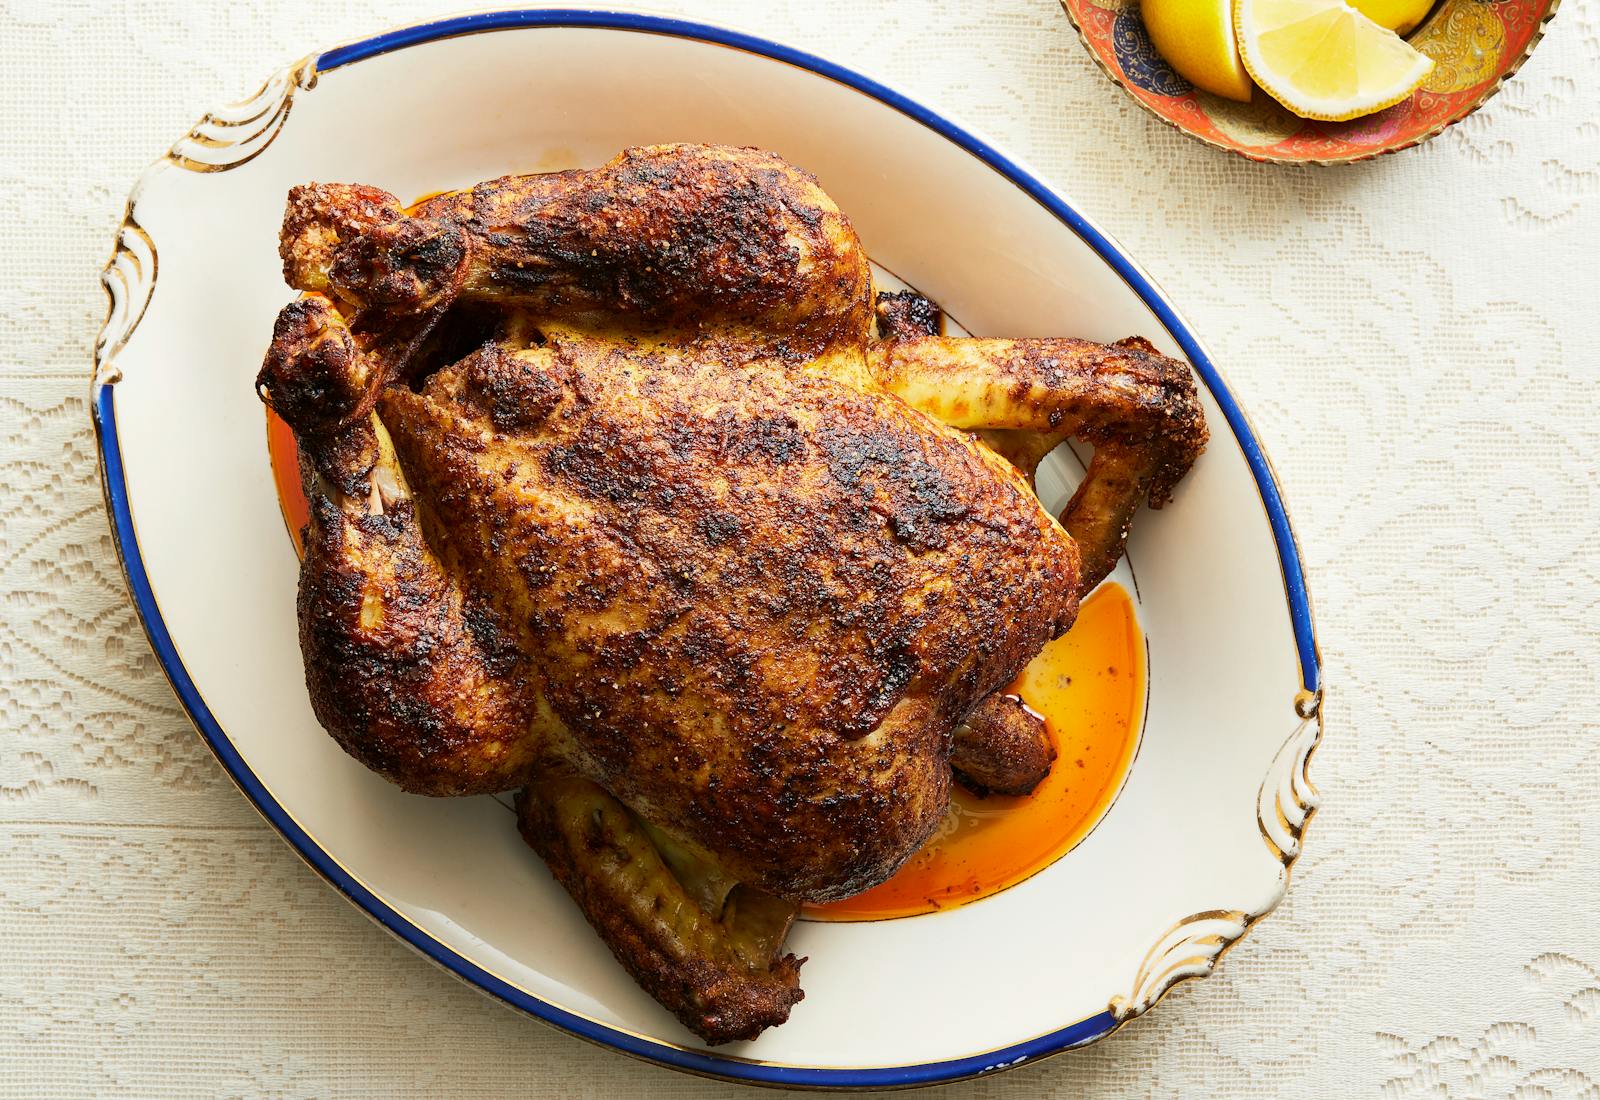 Roast chicken on oval serving platter atop white tablecloth.